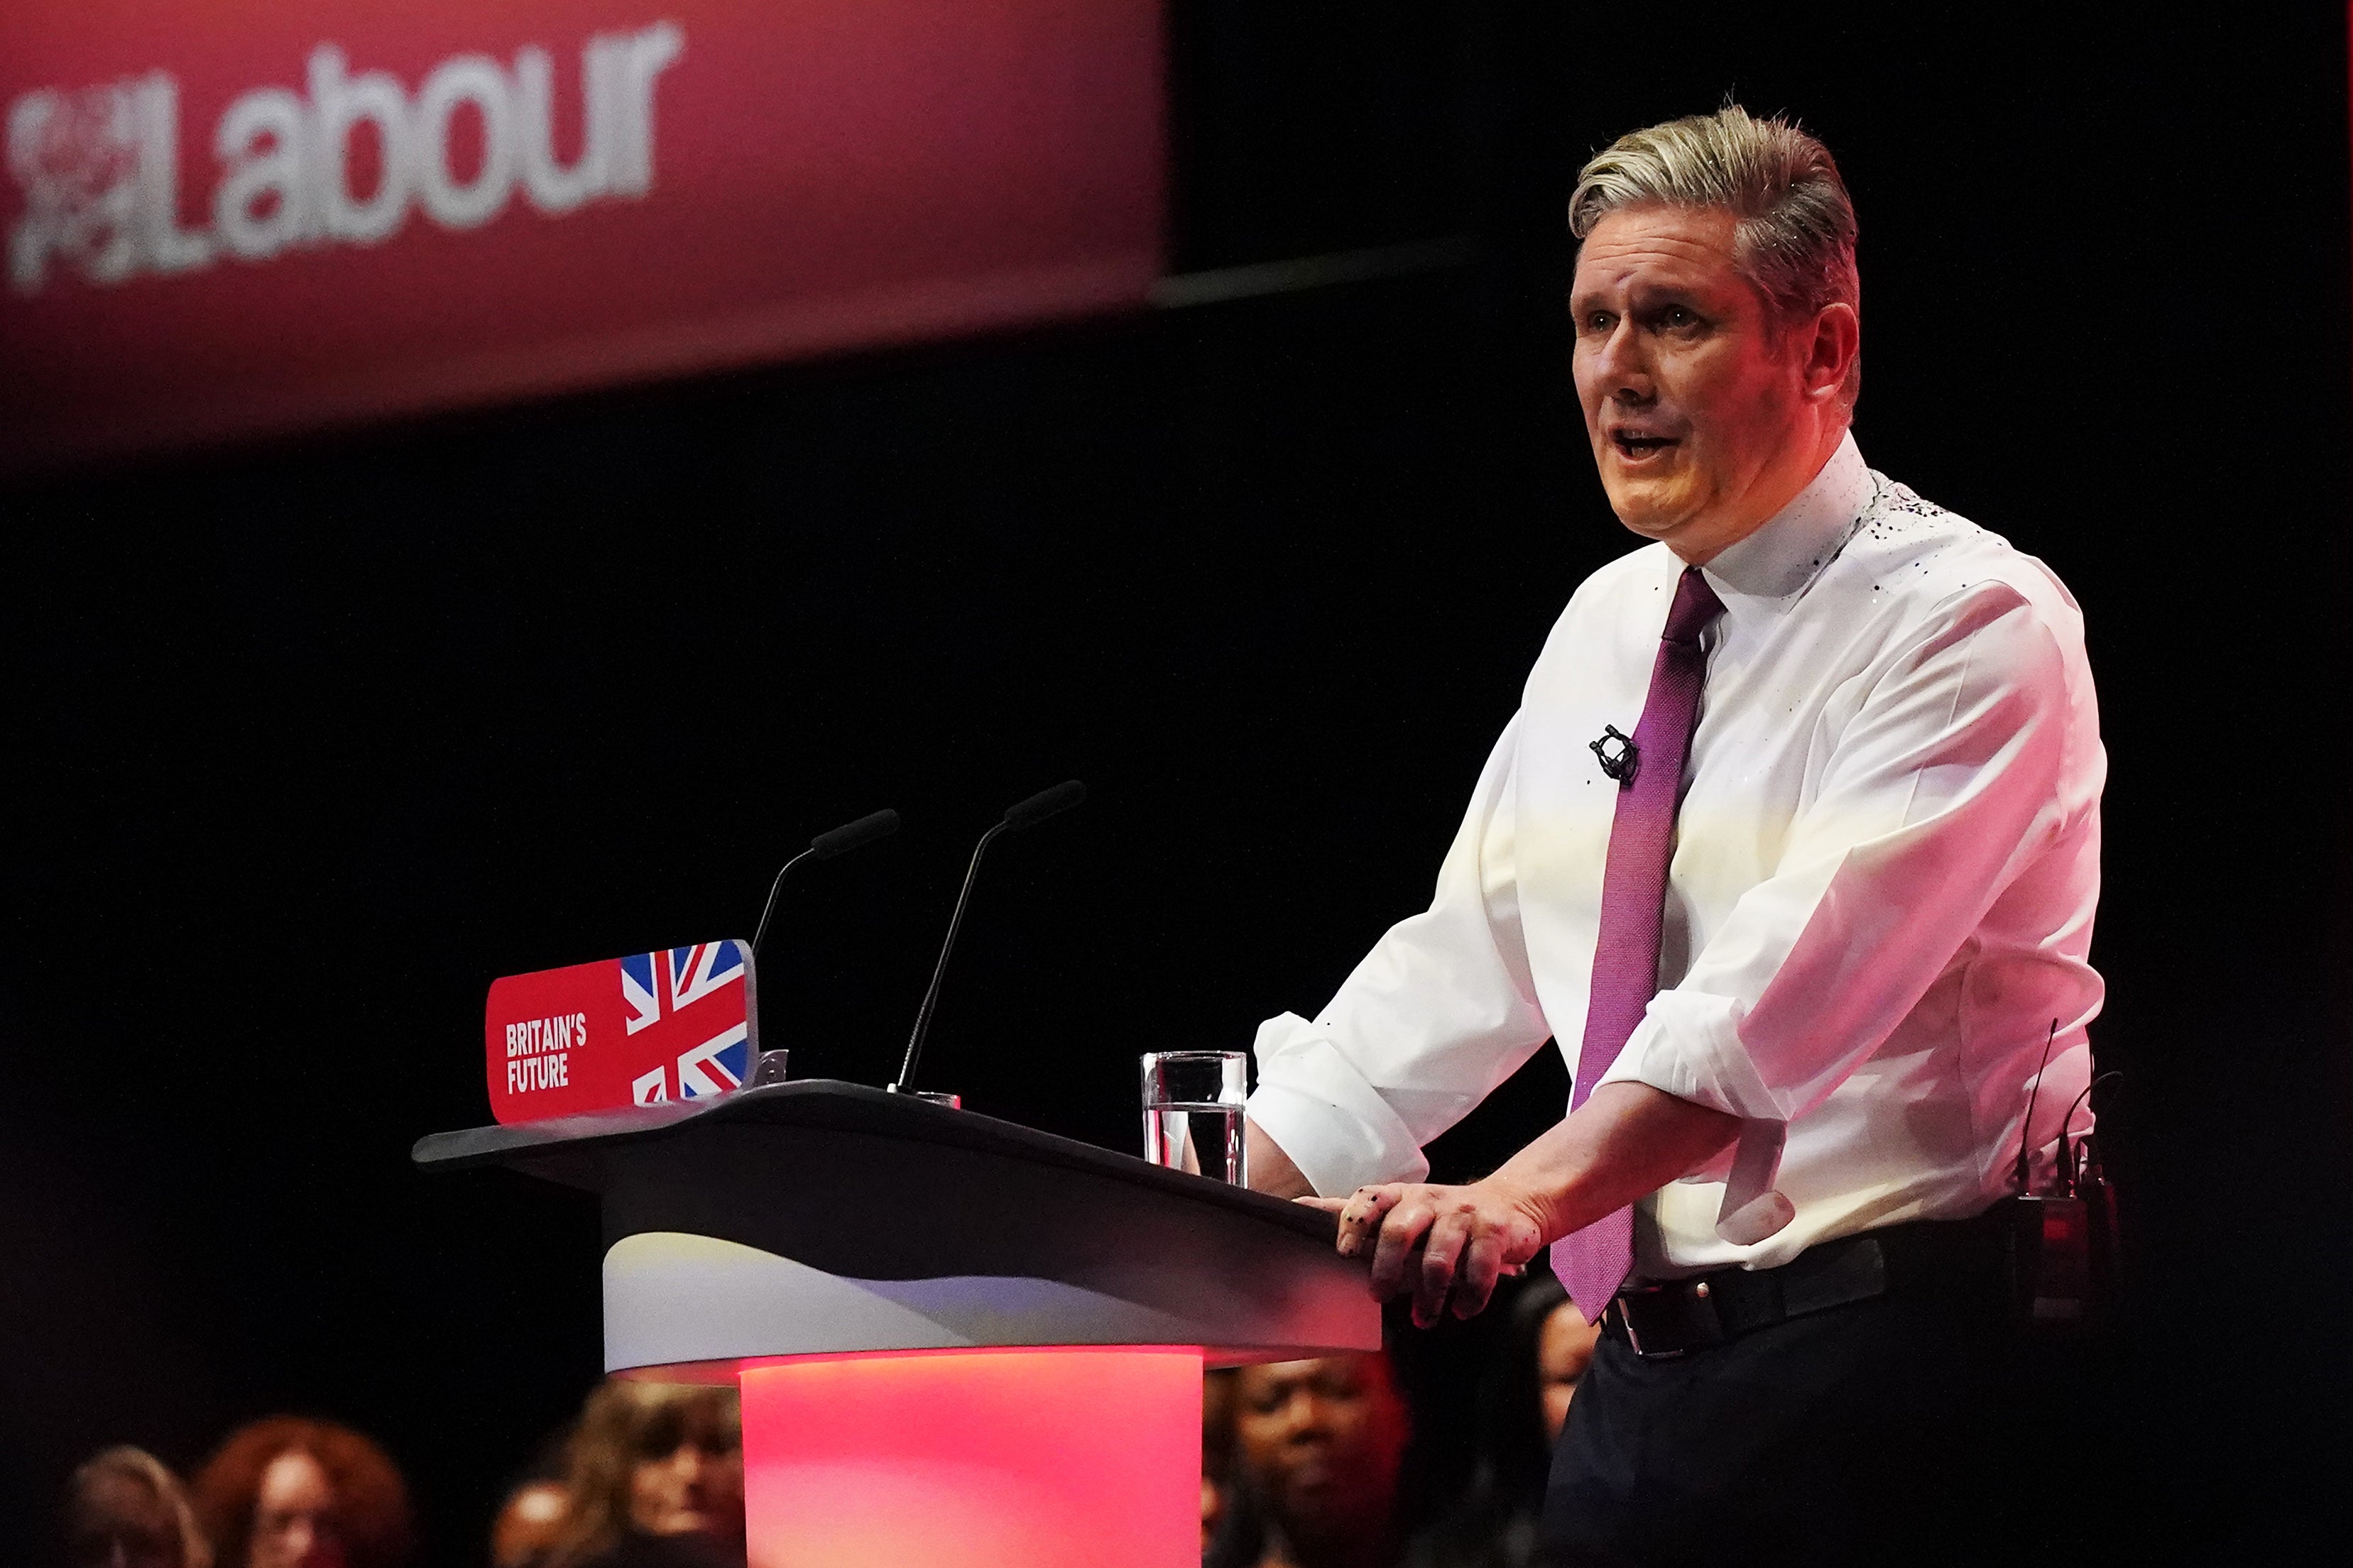 In his speech on Tuesday, Starmer promised to accelerate the building of new homes on unused urban land